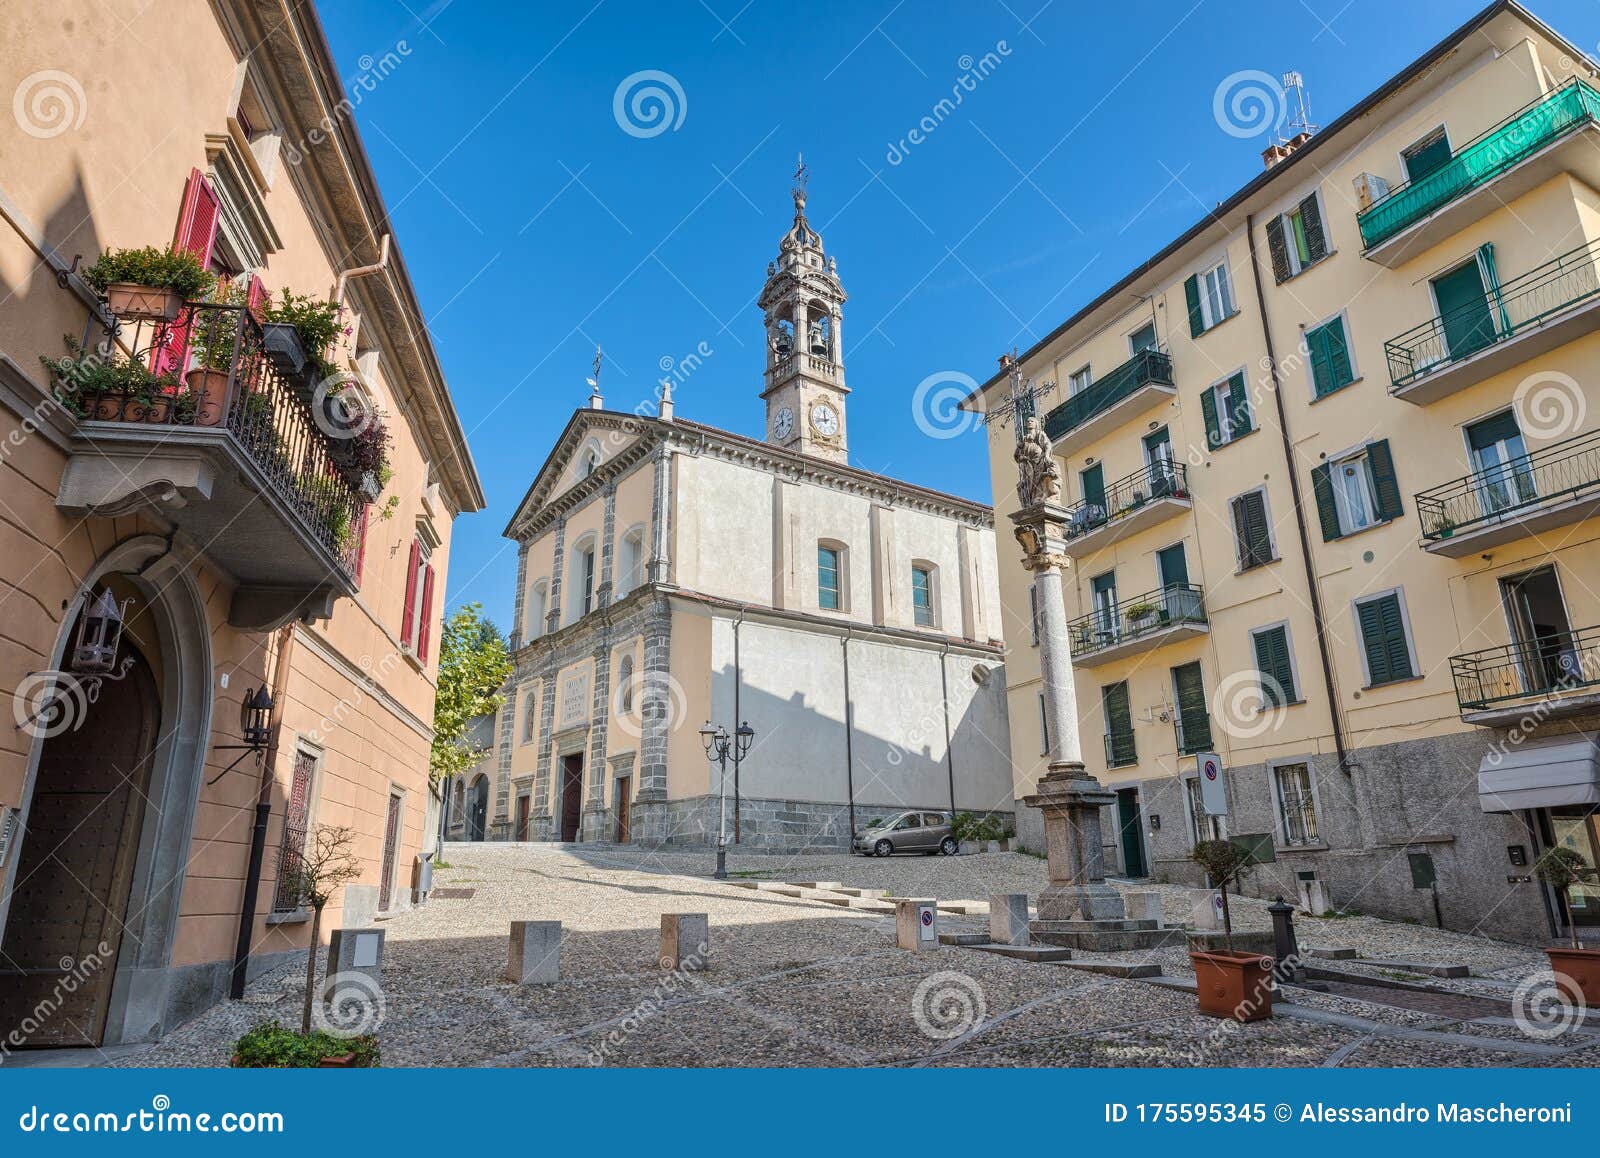 historic center of the town of oggiono, italy